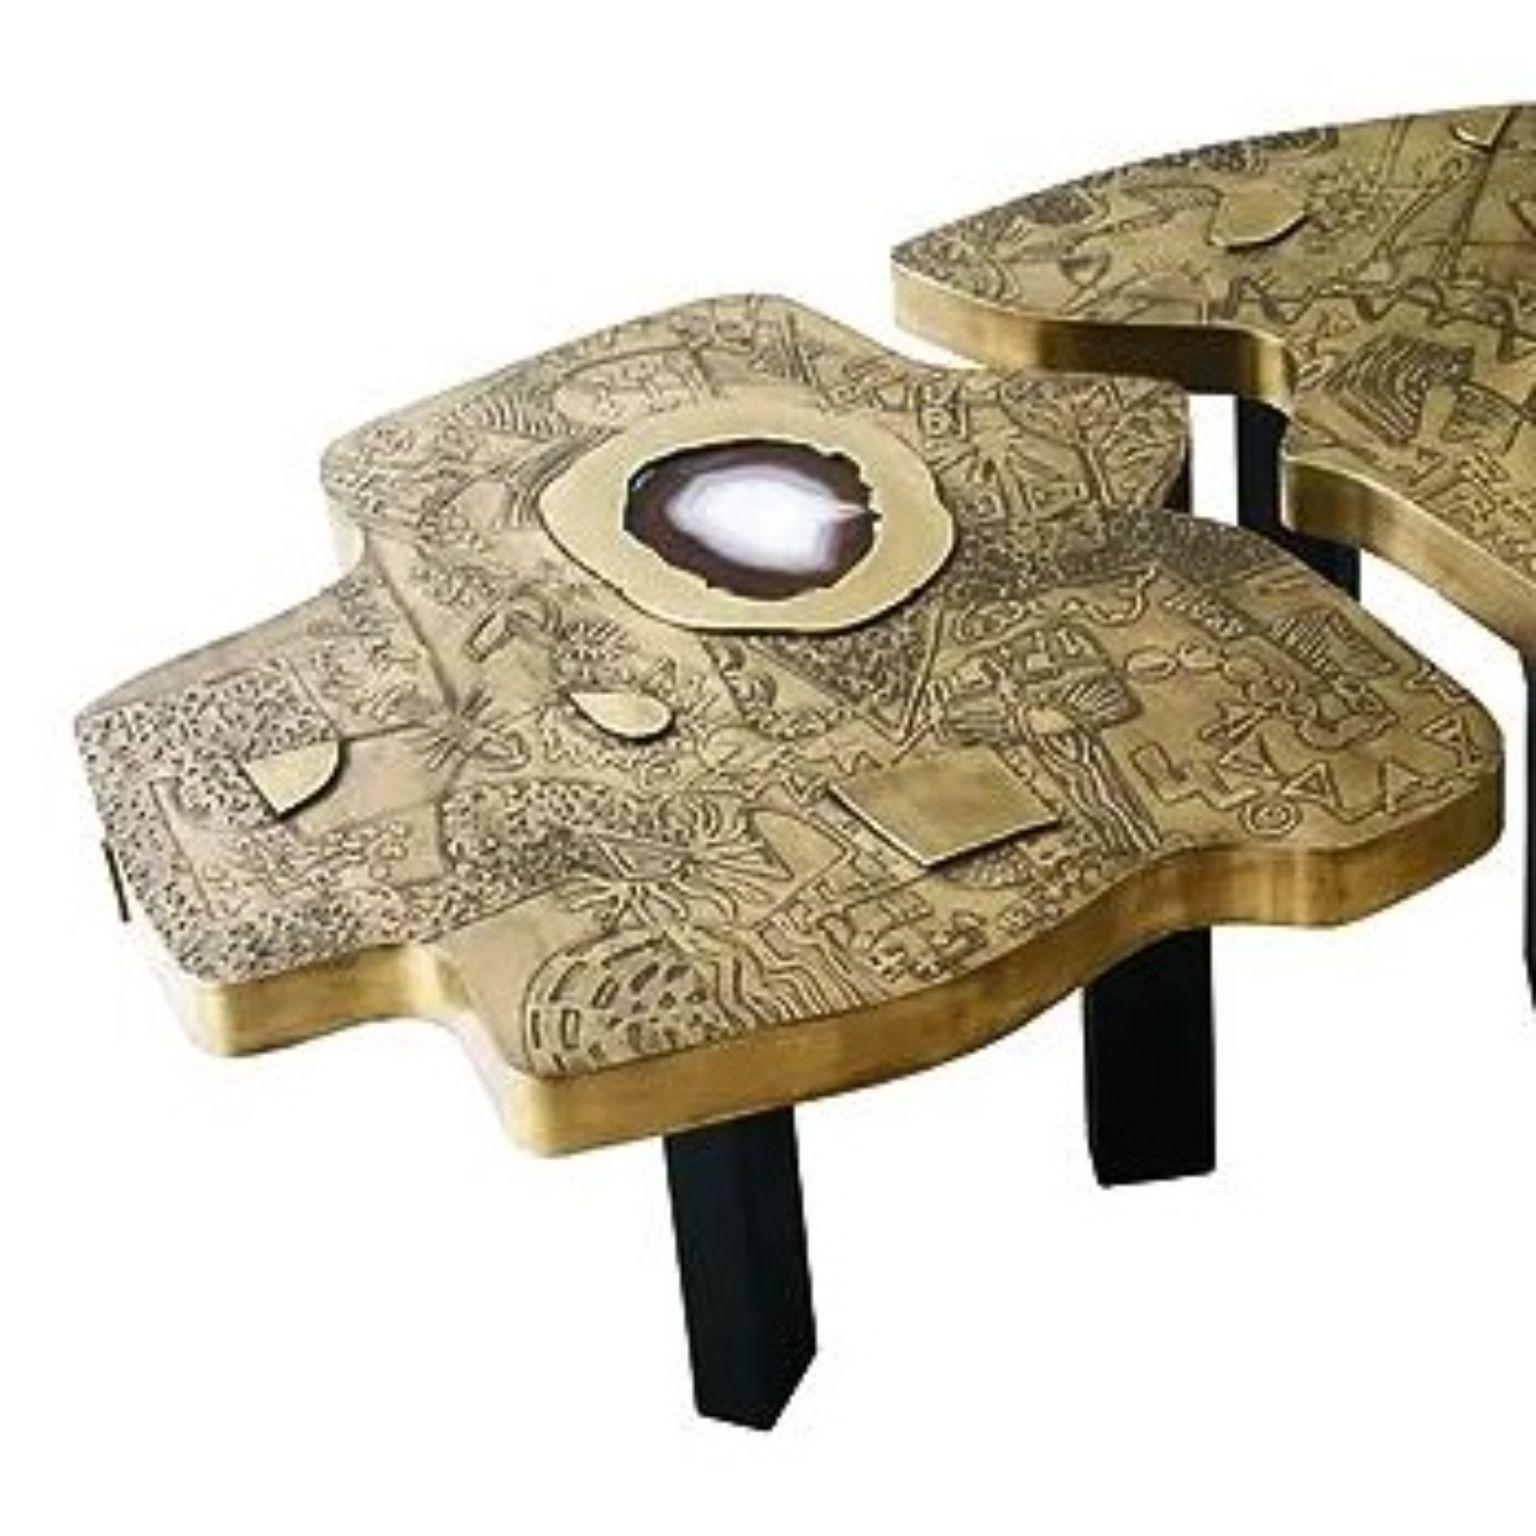 Set Of 2 Eggs Brass Coffee Tables by Brutalist Be
One Of A Kind
Dimensions: Table 1: D 60 x W 65 x H 30 cm.
Table 2: D 60 x W 40 x H 30 cm.
Materials: Brass and agate stone.

Also available in copper and in matte, glossy or black-patinated finishes.